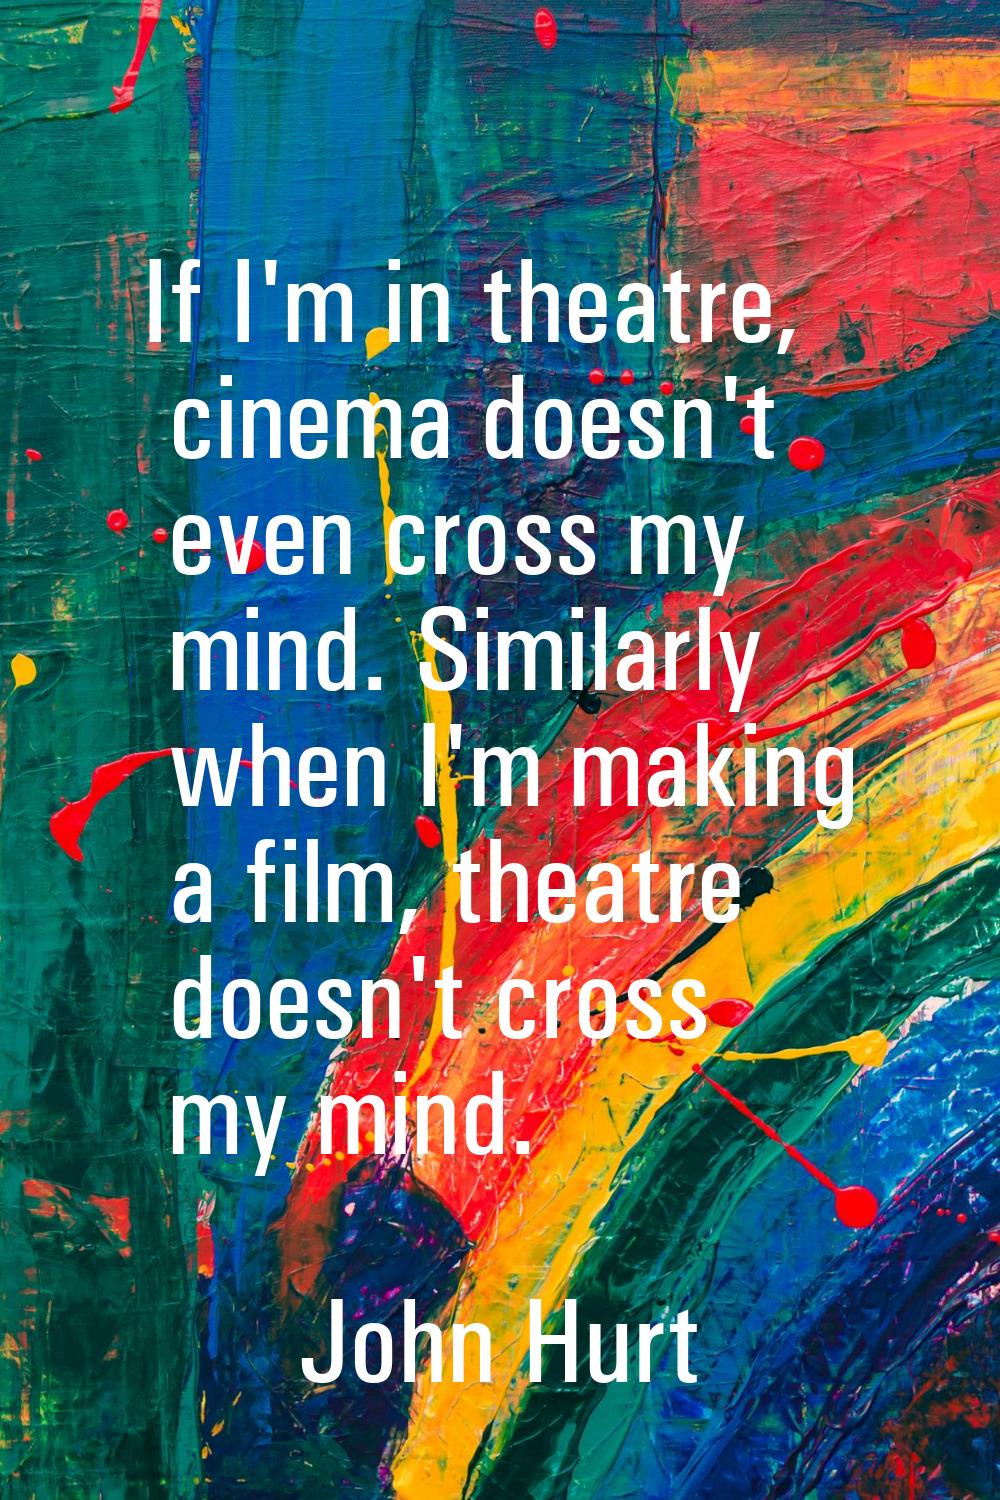 If I'm in theatre, cinema doesn't even cross my mind. Similarly when I'm making a film, theatre doe